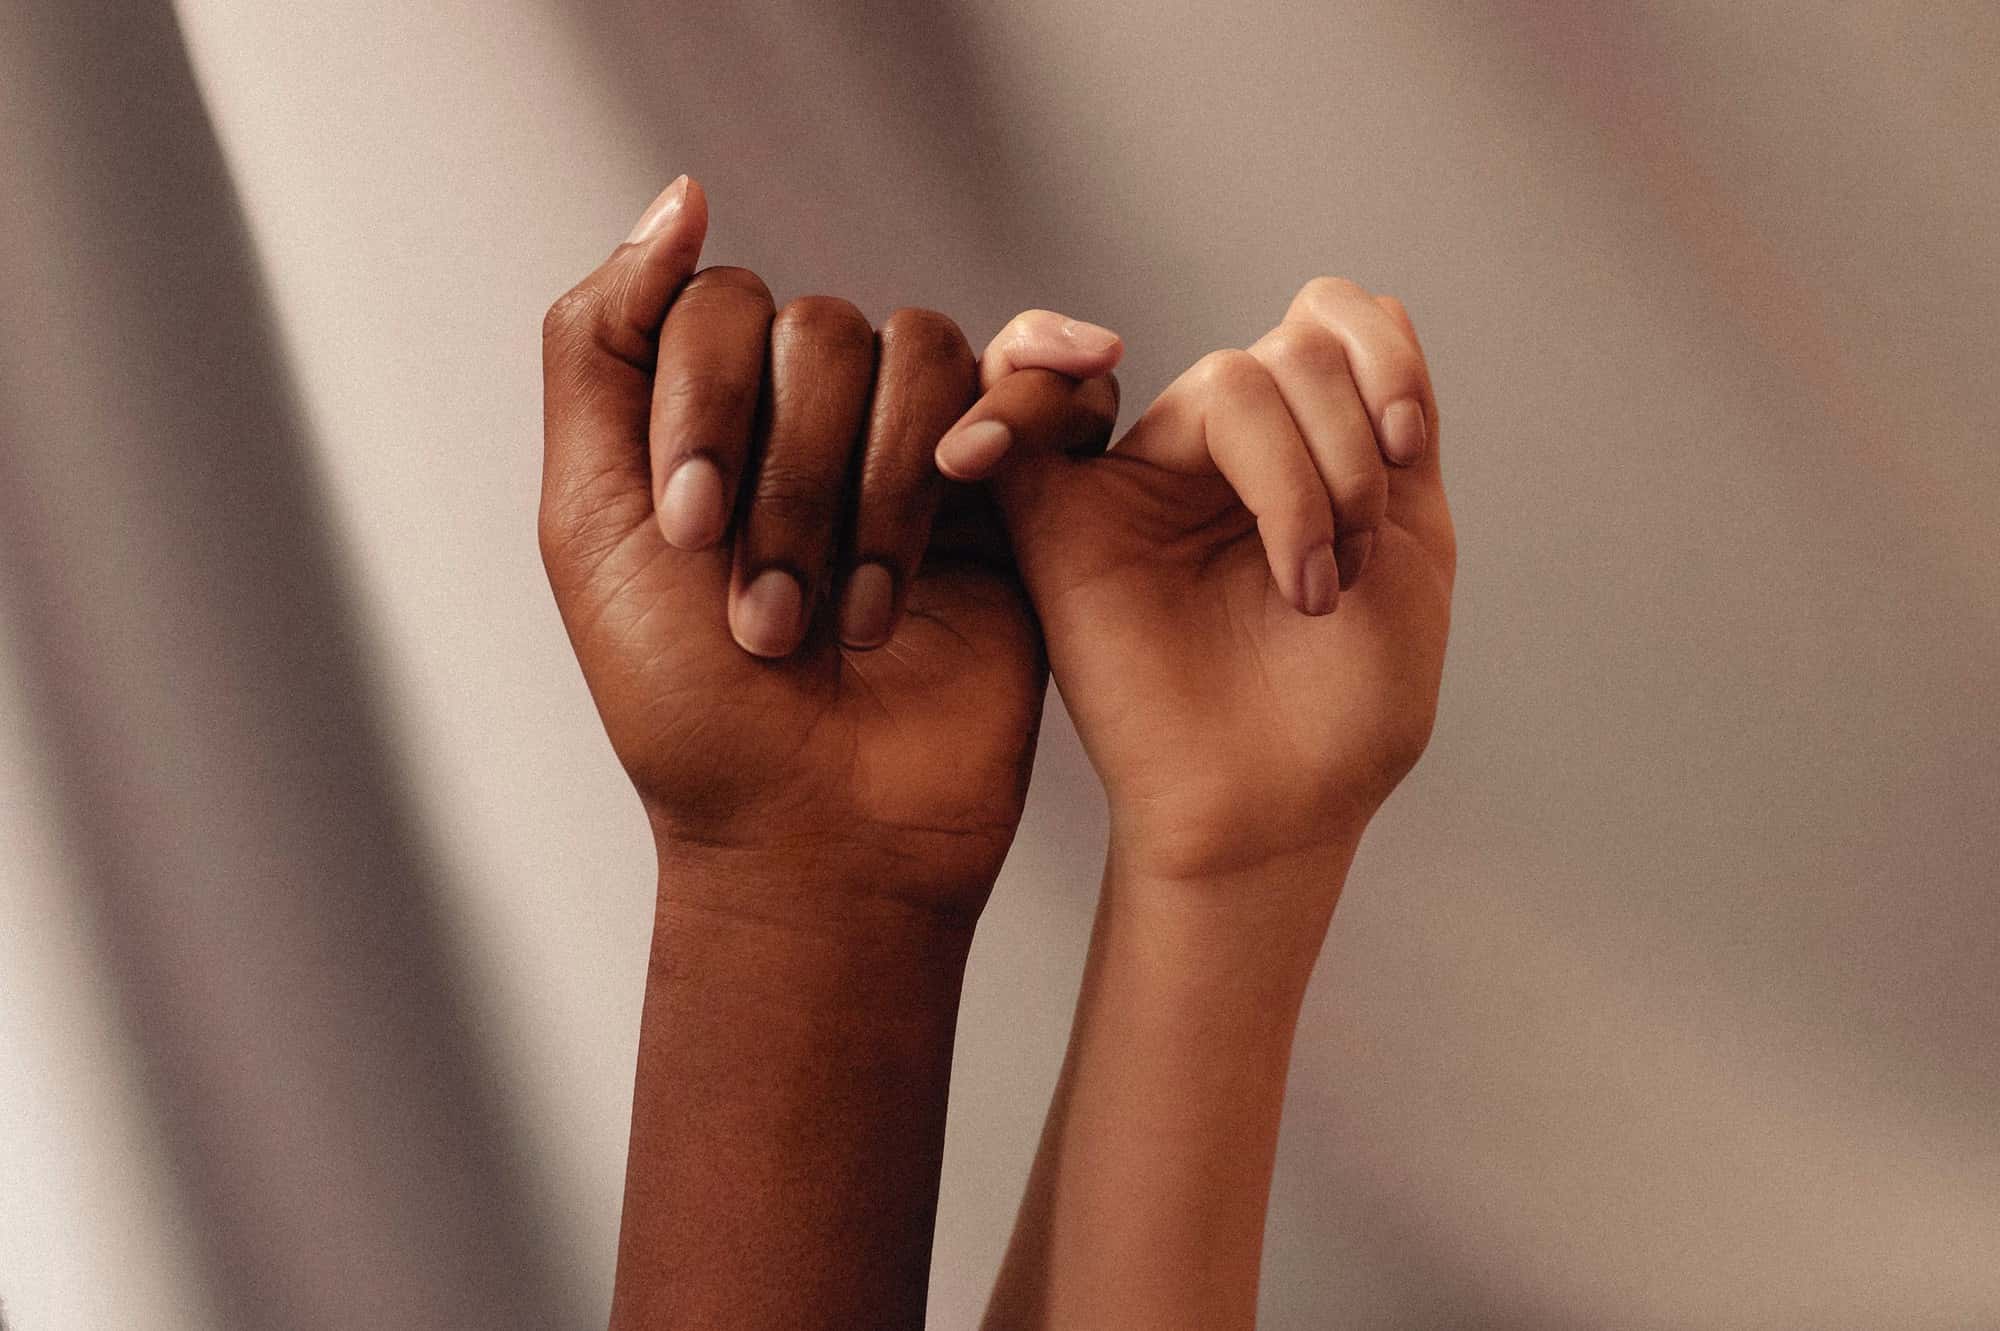 2 women hands, focus on holding pinkie fingers